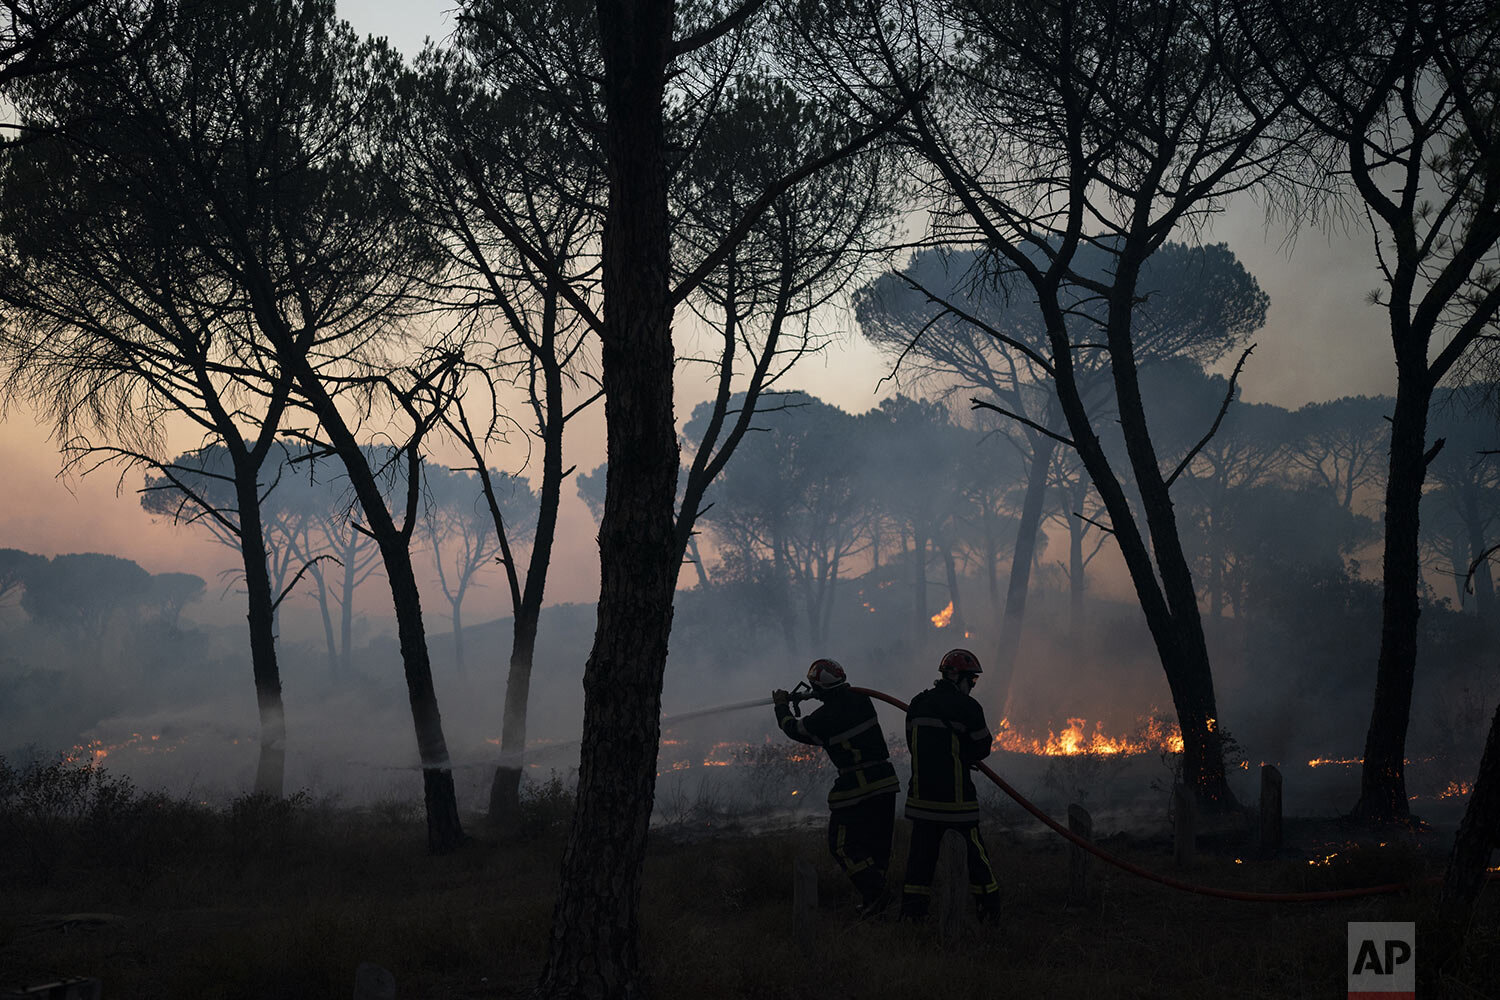  Firemen use a hose to extinguish a fire near Le Luc, southern France, Tuesday, Aug. 17, 2021. Thousands of people fled homes, campgrounds and hotels near the French Riviera on Tuesday as firefighters battled a blaze that raced through nearby forests